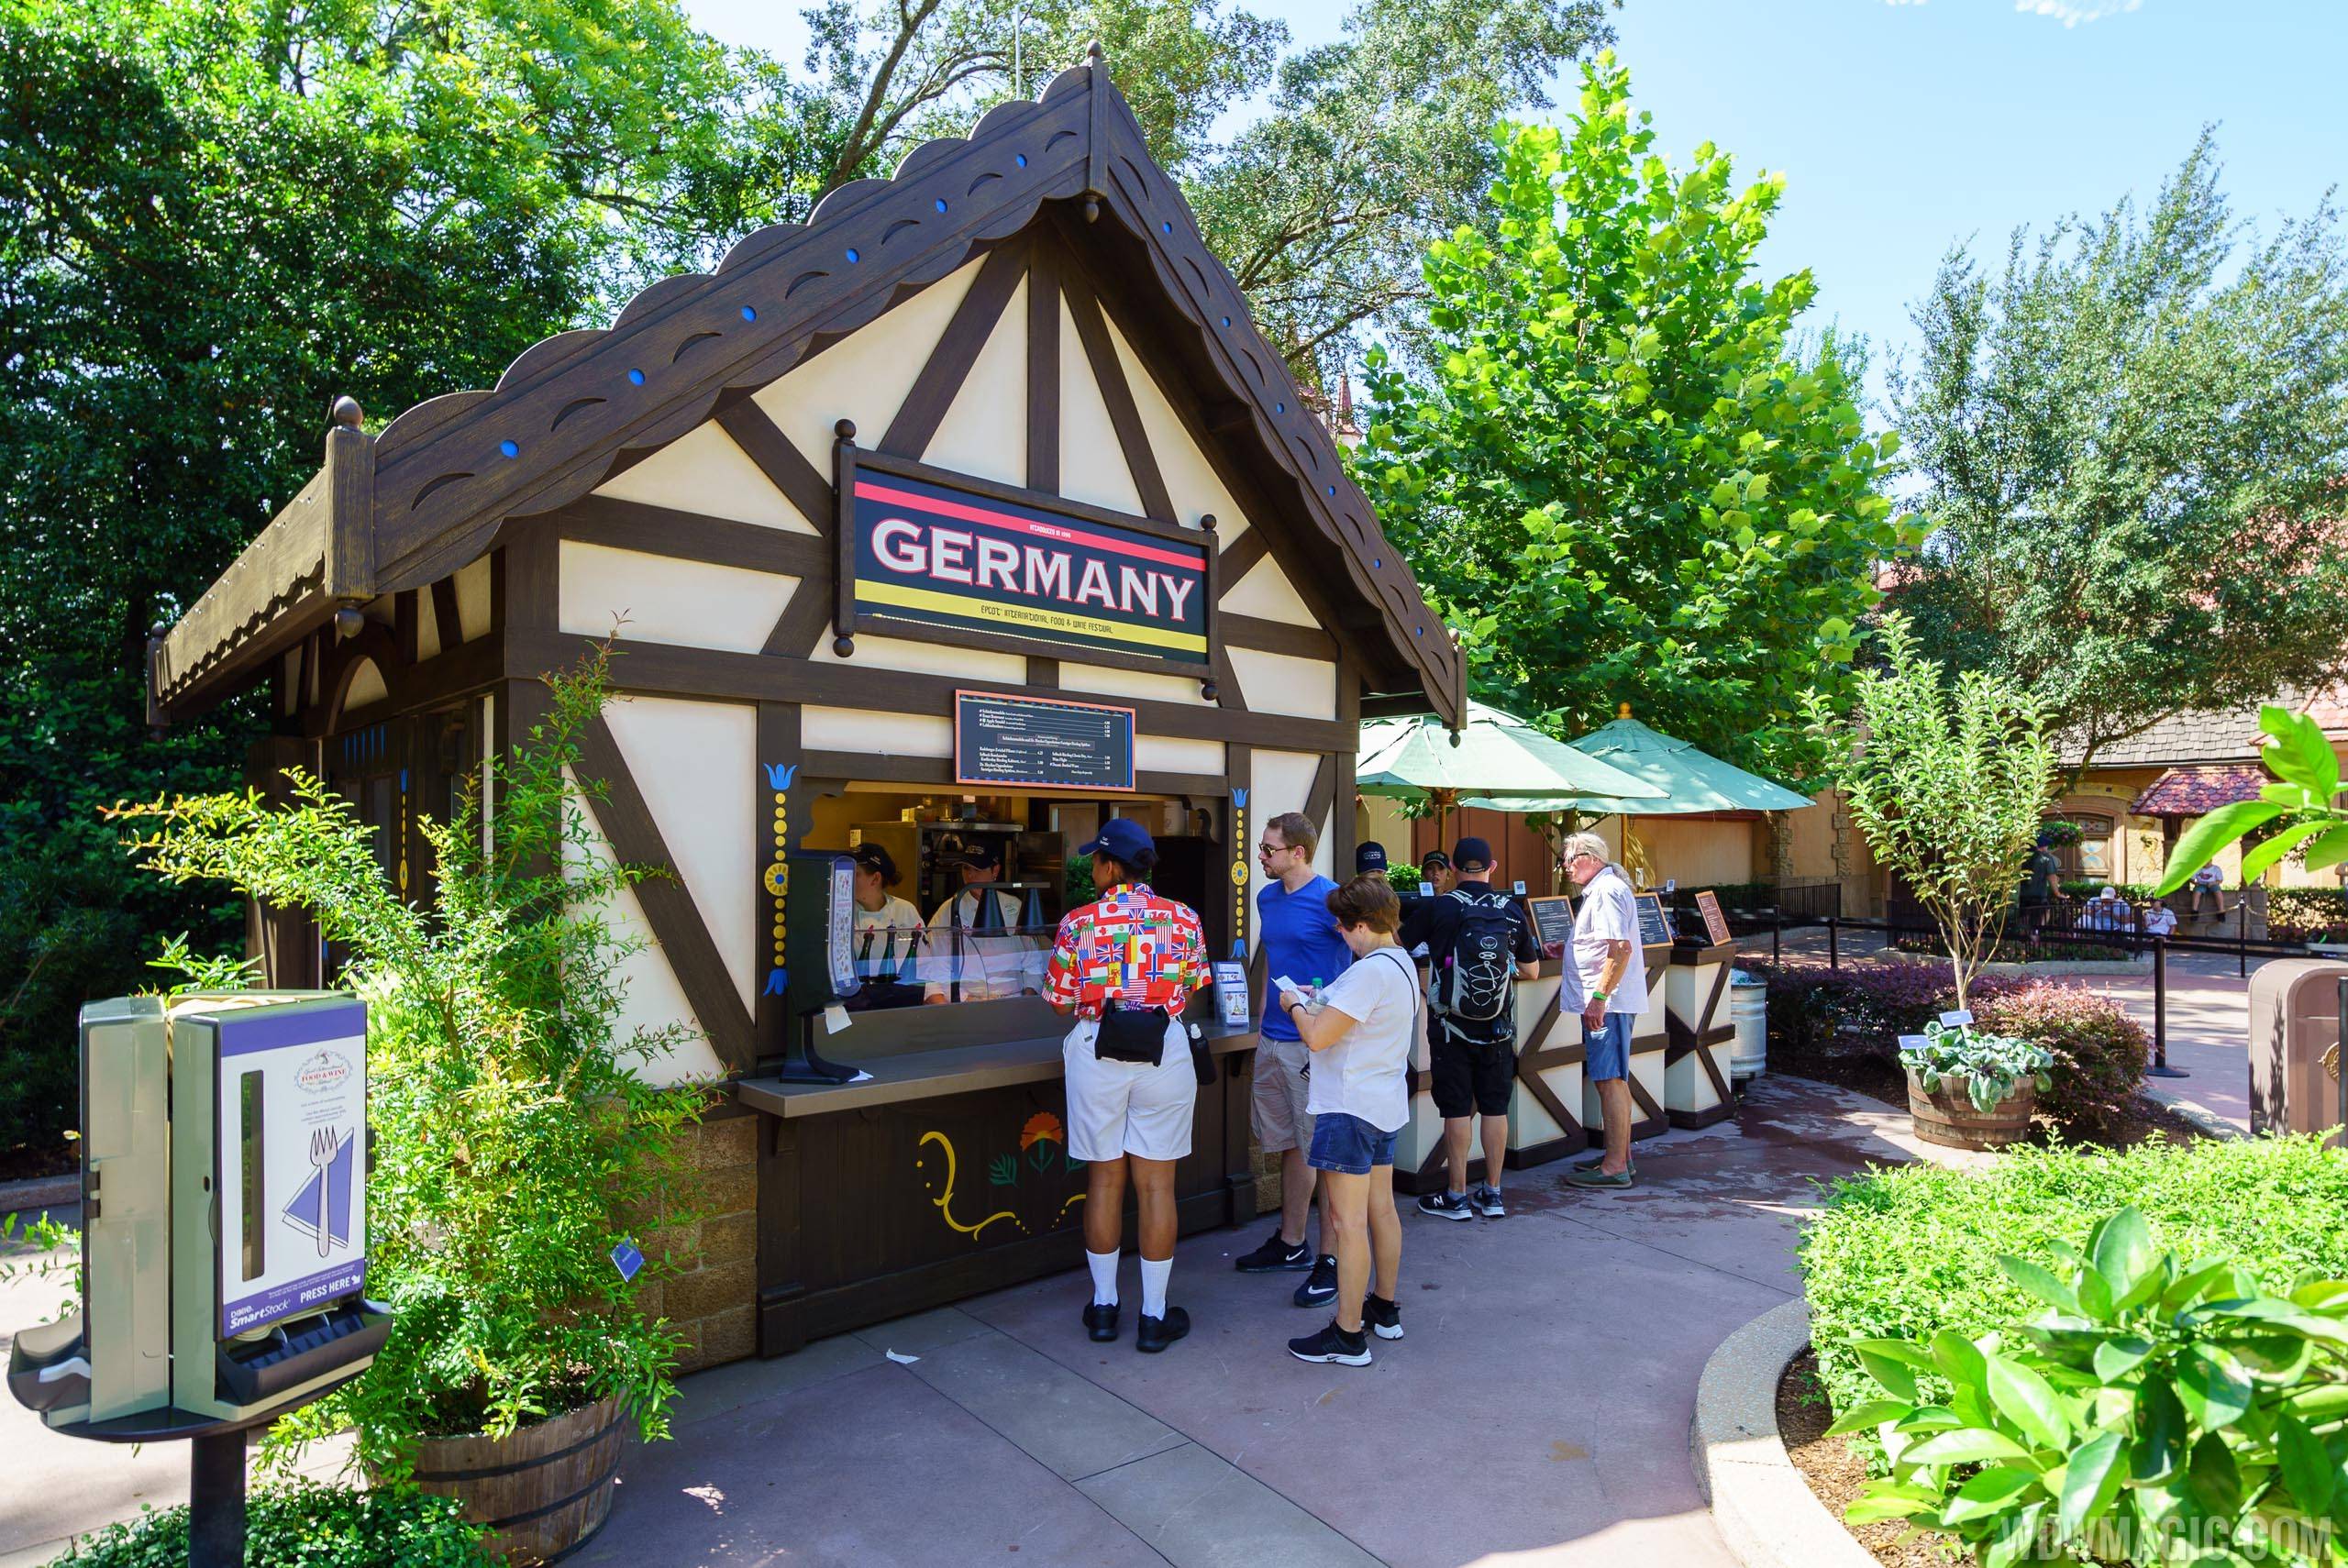 2017 Epcot Food and Wine Festival - Germany marketplace kiosk